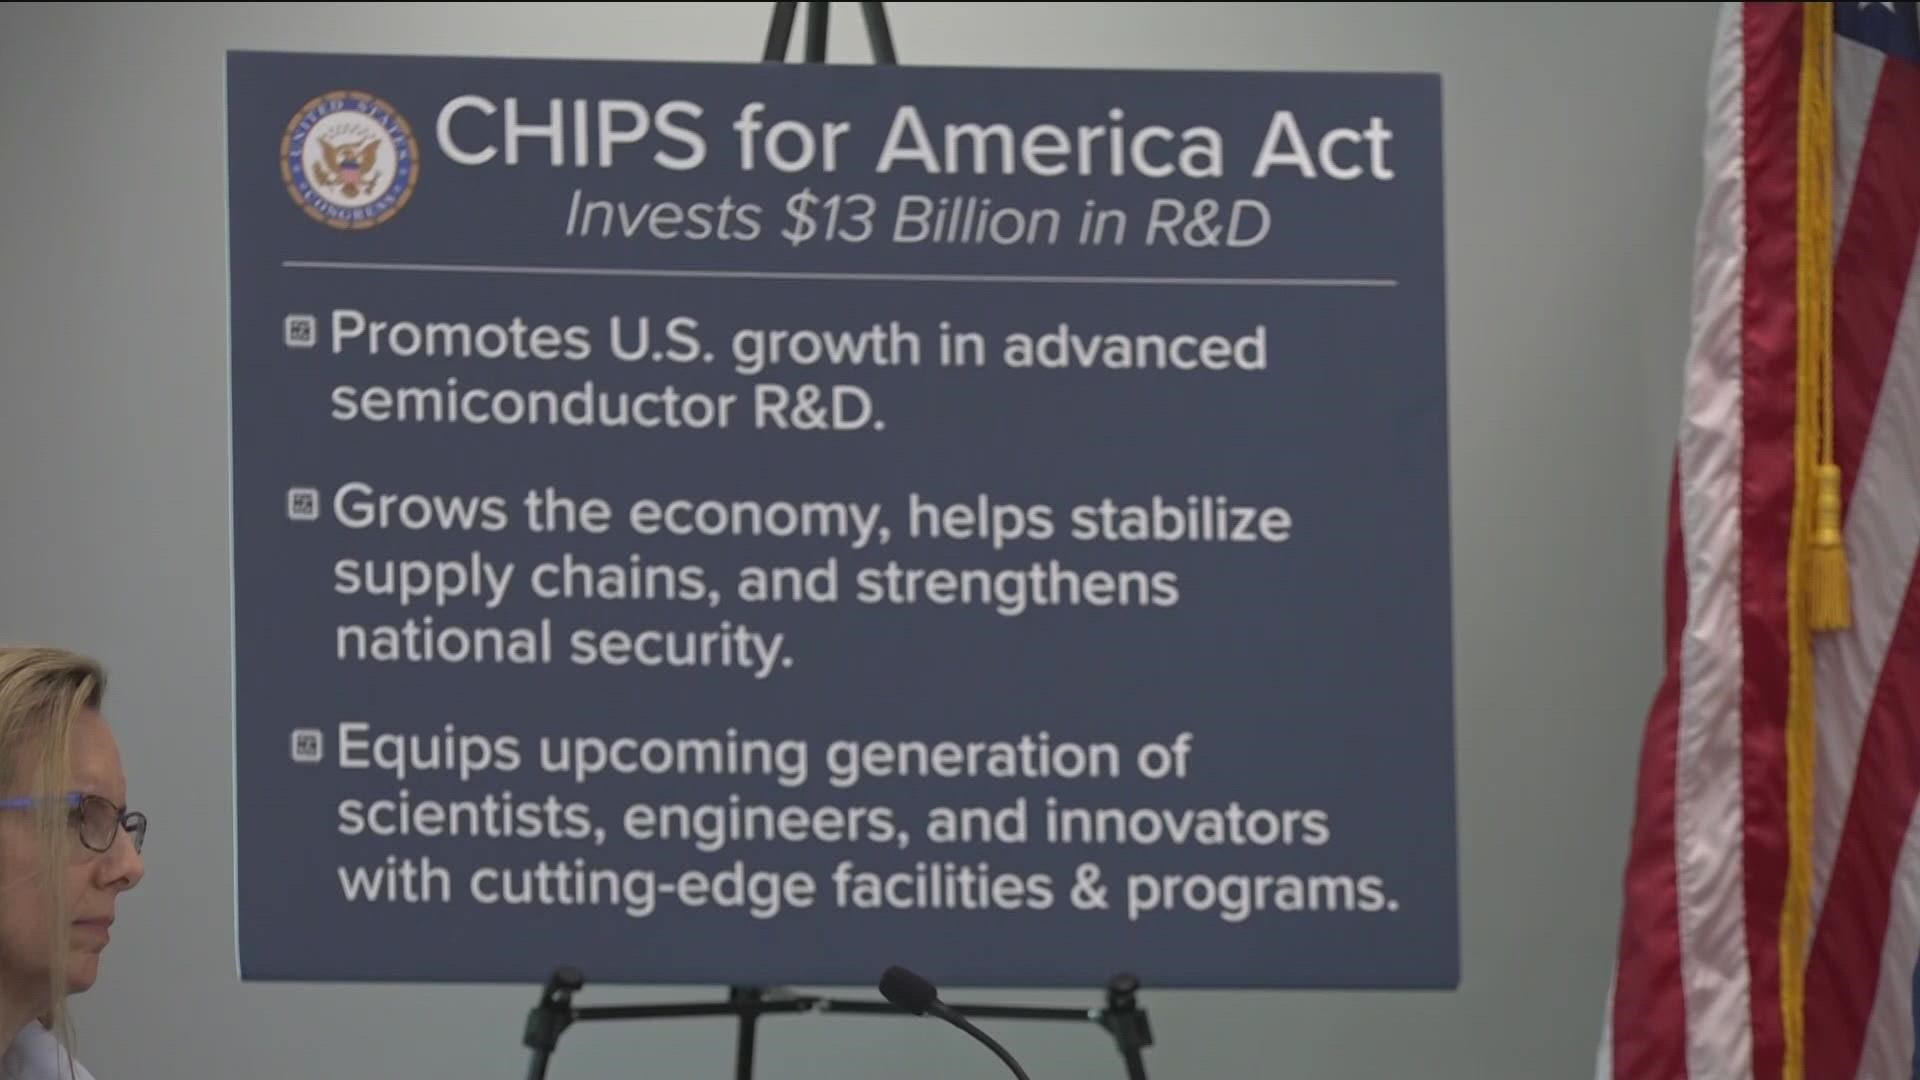 The bill provides incentives to bring chip-making facilities back to the U.S.